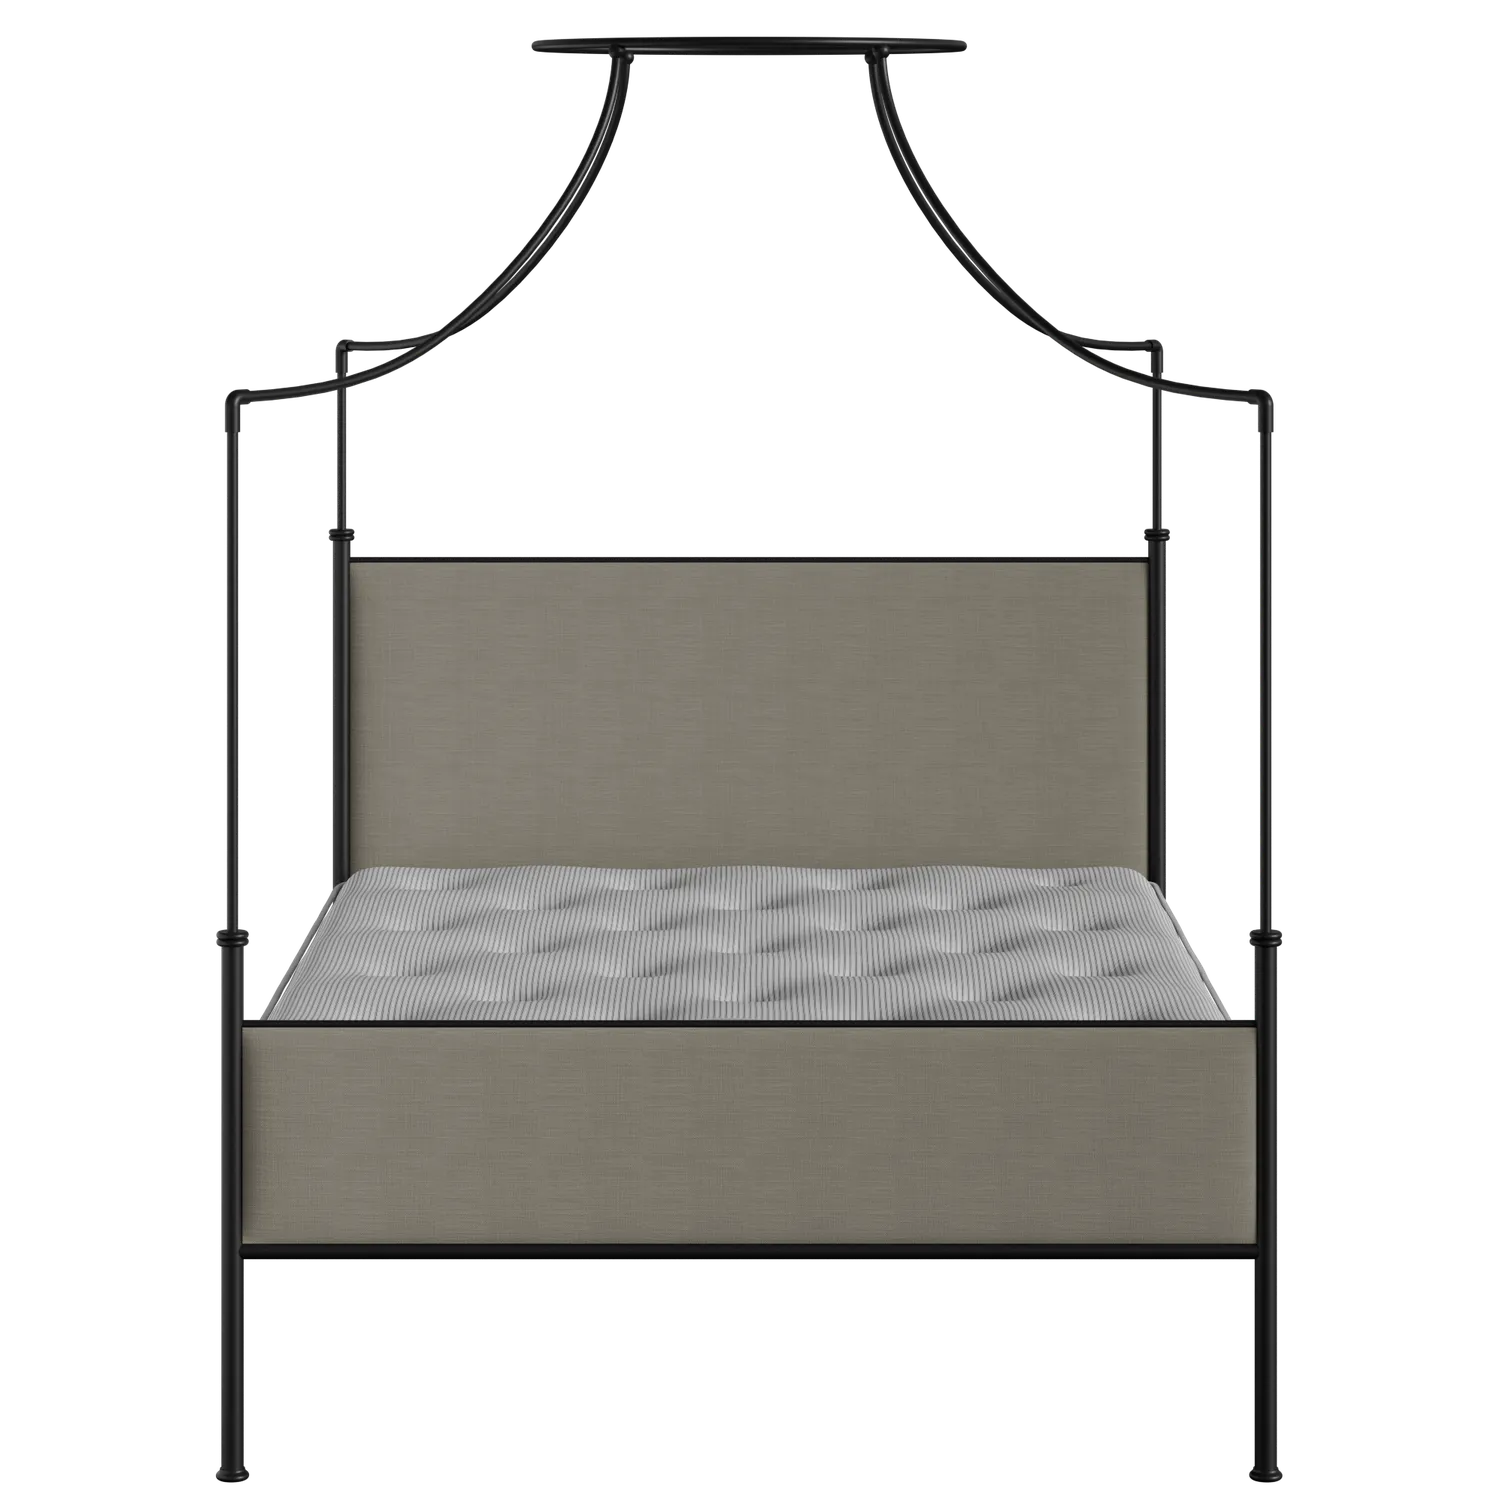 Waterloo iron/metal upholstered bed in black with grey fabric